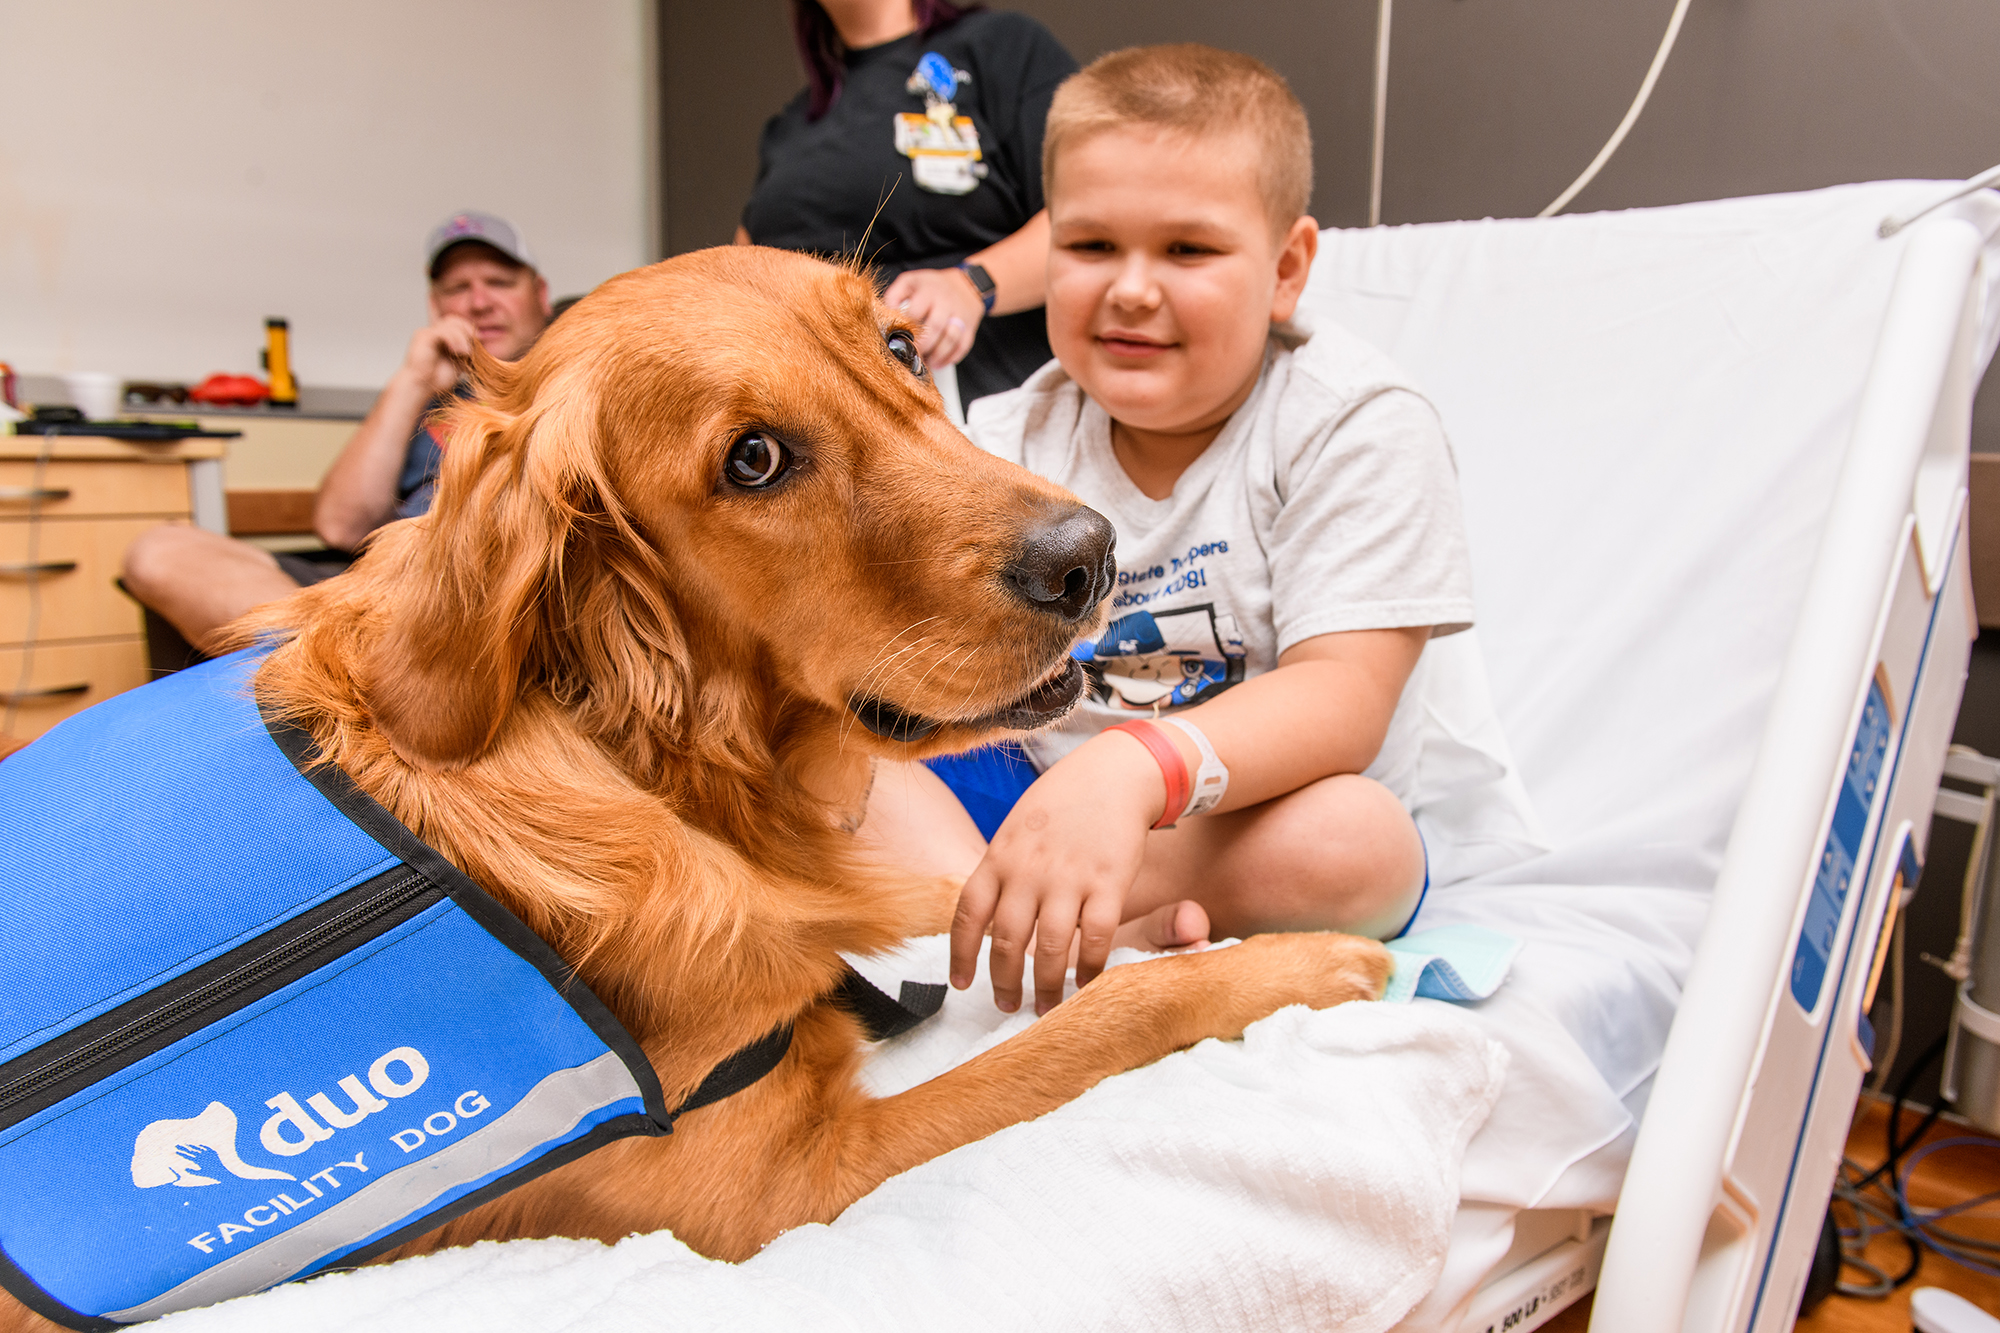 Kale West, 9, of Boonville meets with Link, the University of Missouri Children's Hospital facility dog Link.